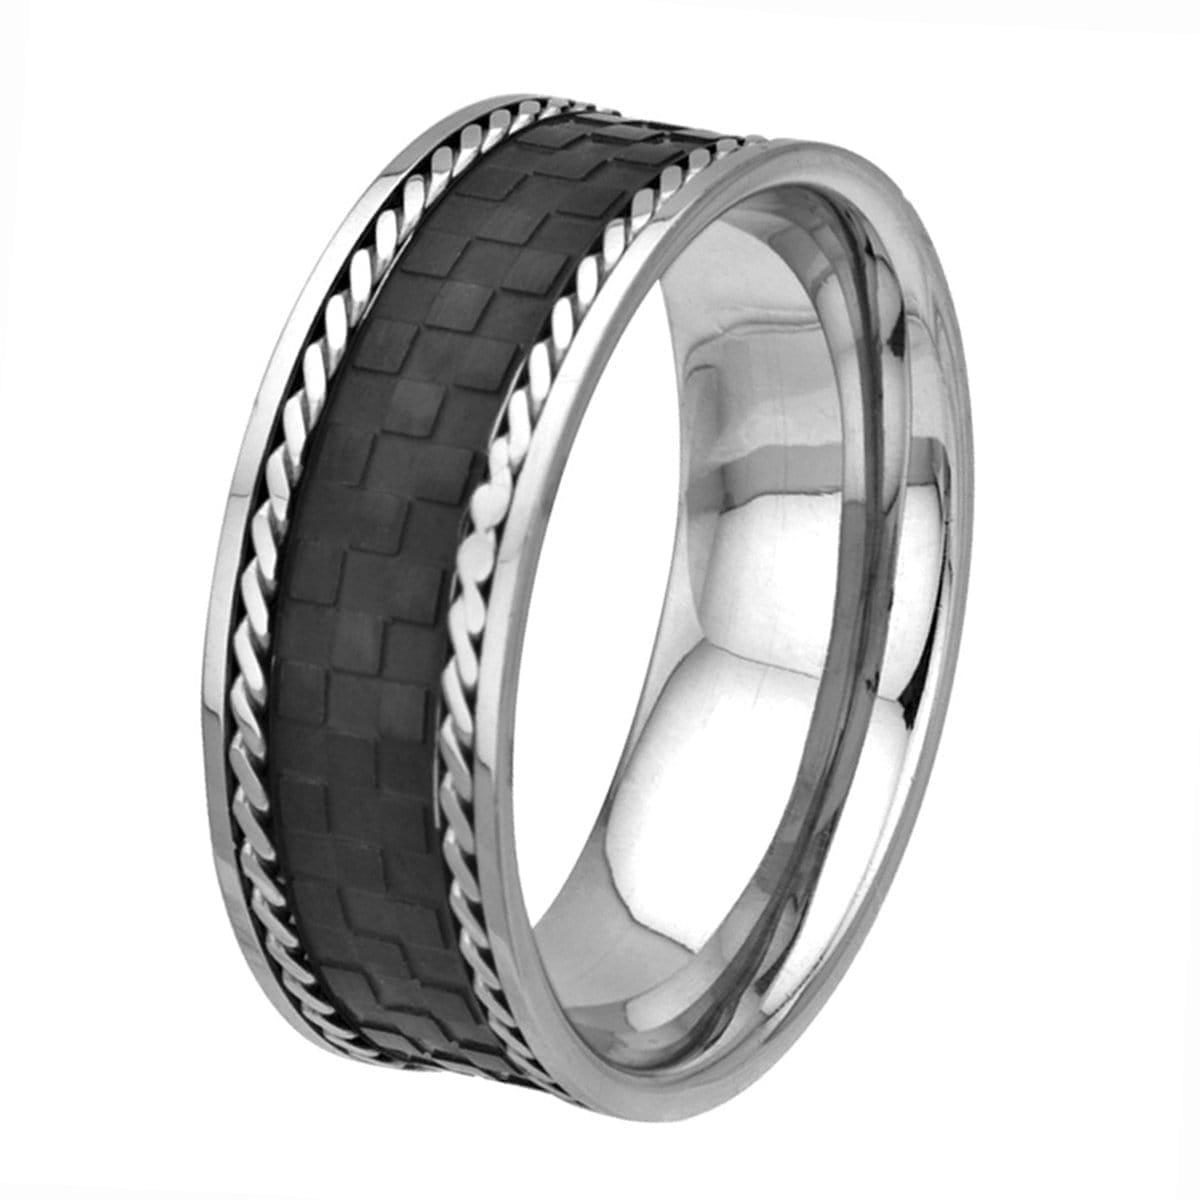 INOX JEWELRY Rings Black and Silver Tone Stainless Steel Checkered Ring with Braided Border